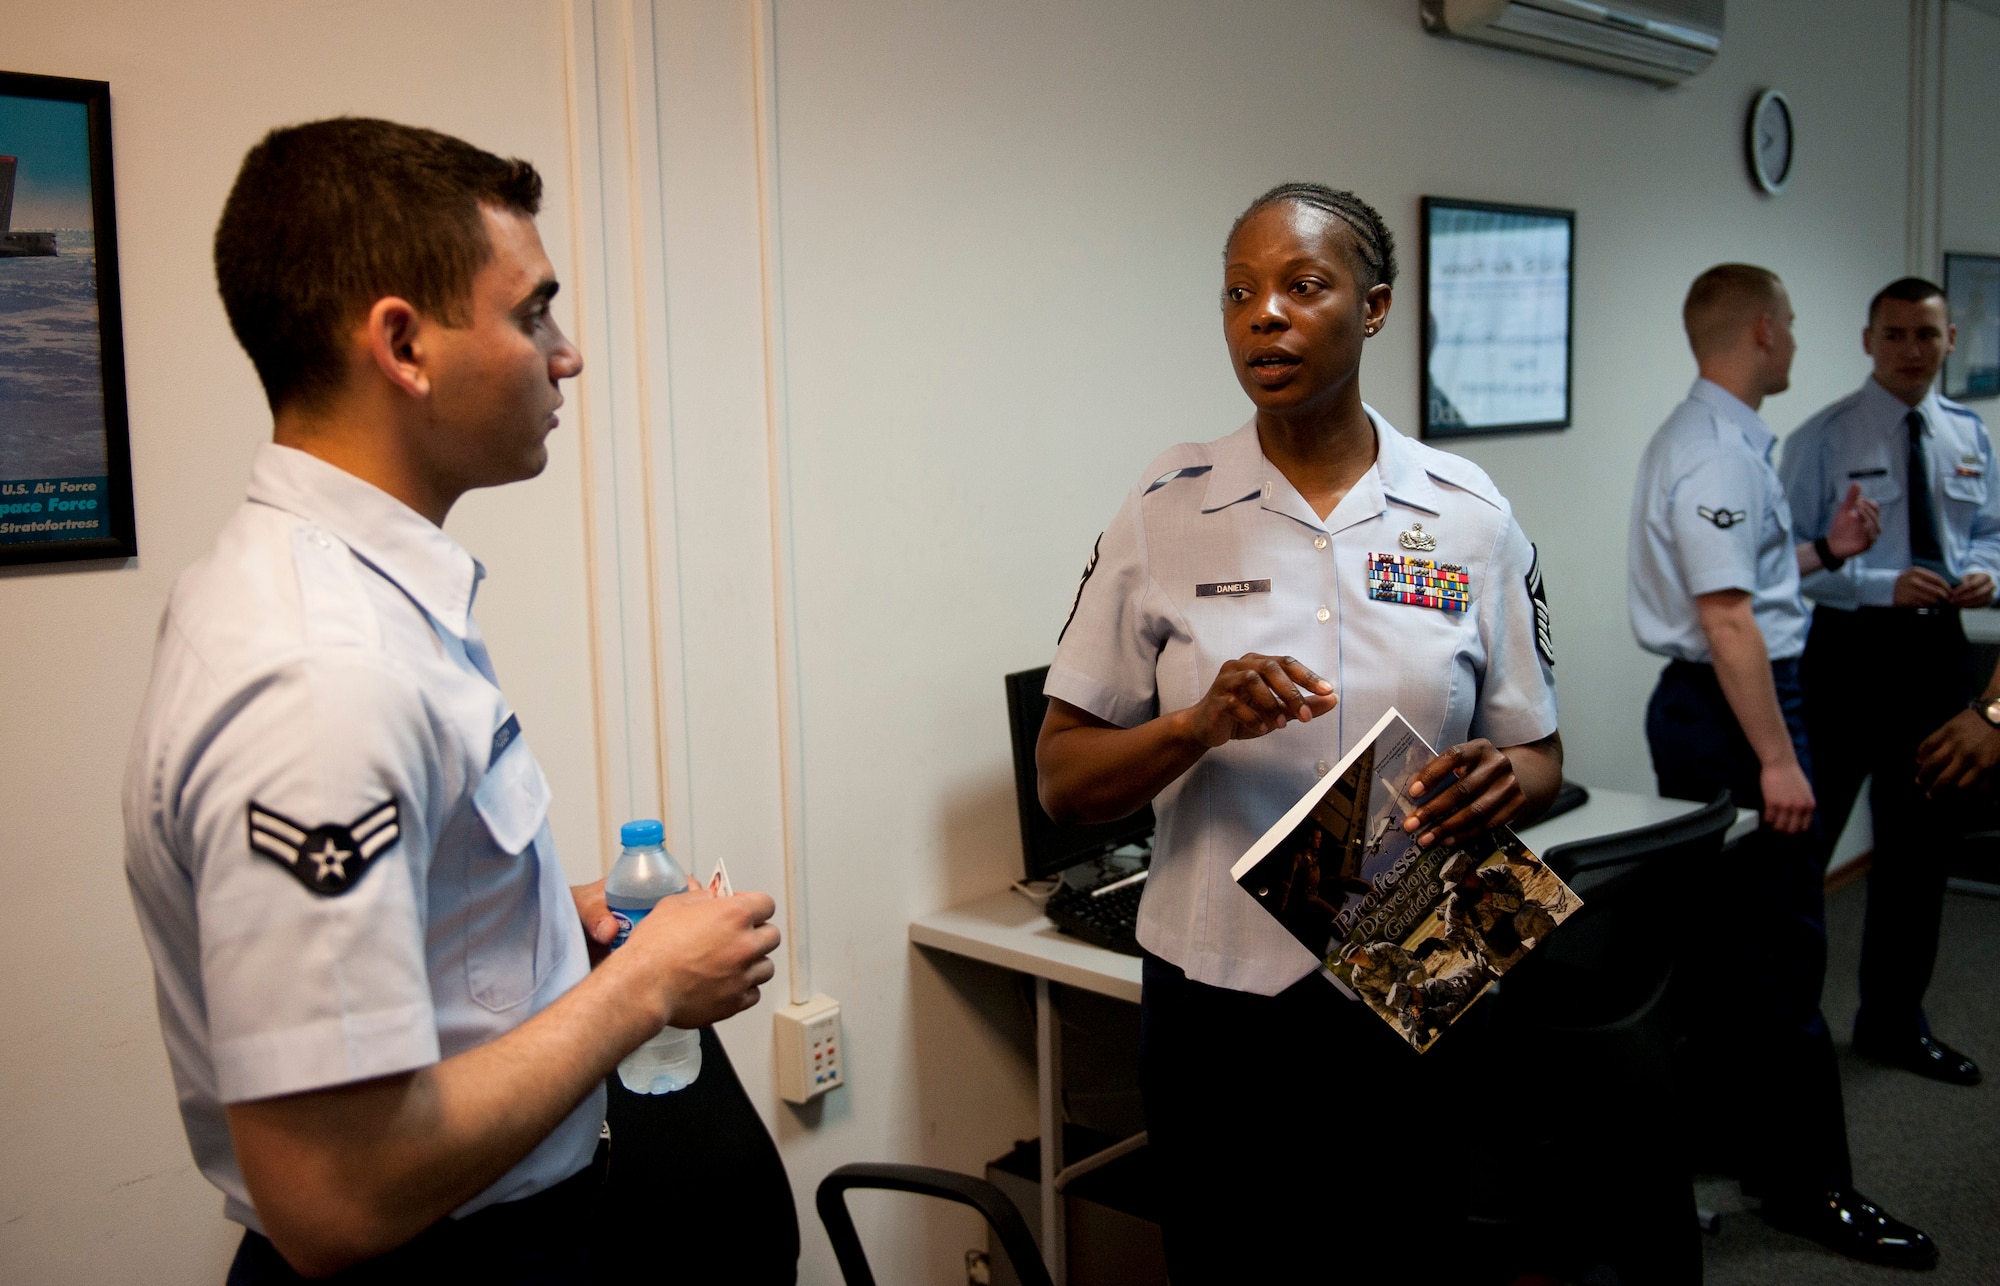 Senior Master Sgt. Ouida Daniels, right, 39th Force Support Squadron career advisor, talks to an Airman prior to a briefing April 9, 2012, at Incirlik Air Base, Turkey. As the career advisor, Daniels assists Incirlik Airmen by helping find special duties in their career fields, explaining how cross training works and the eligibility requirements to cross train, relaying the options one has when separating from the Air Force, and showing where to find information on writing resumes and other skills. (U.S. Air Force photo by Senior Airman William A. O'Brien/Released) 